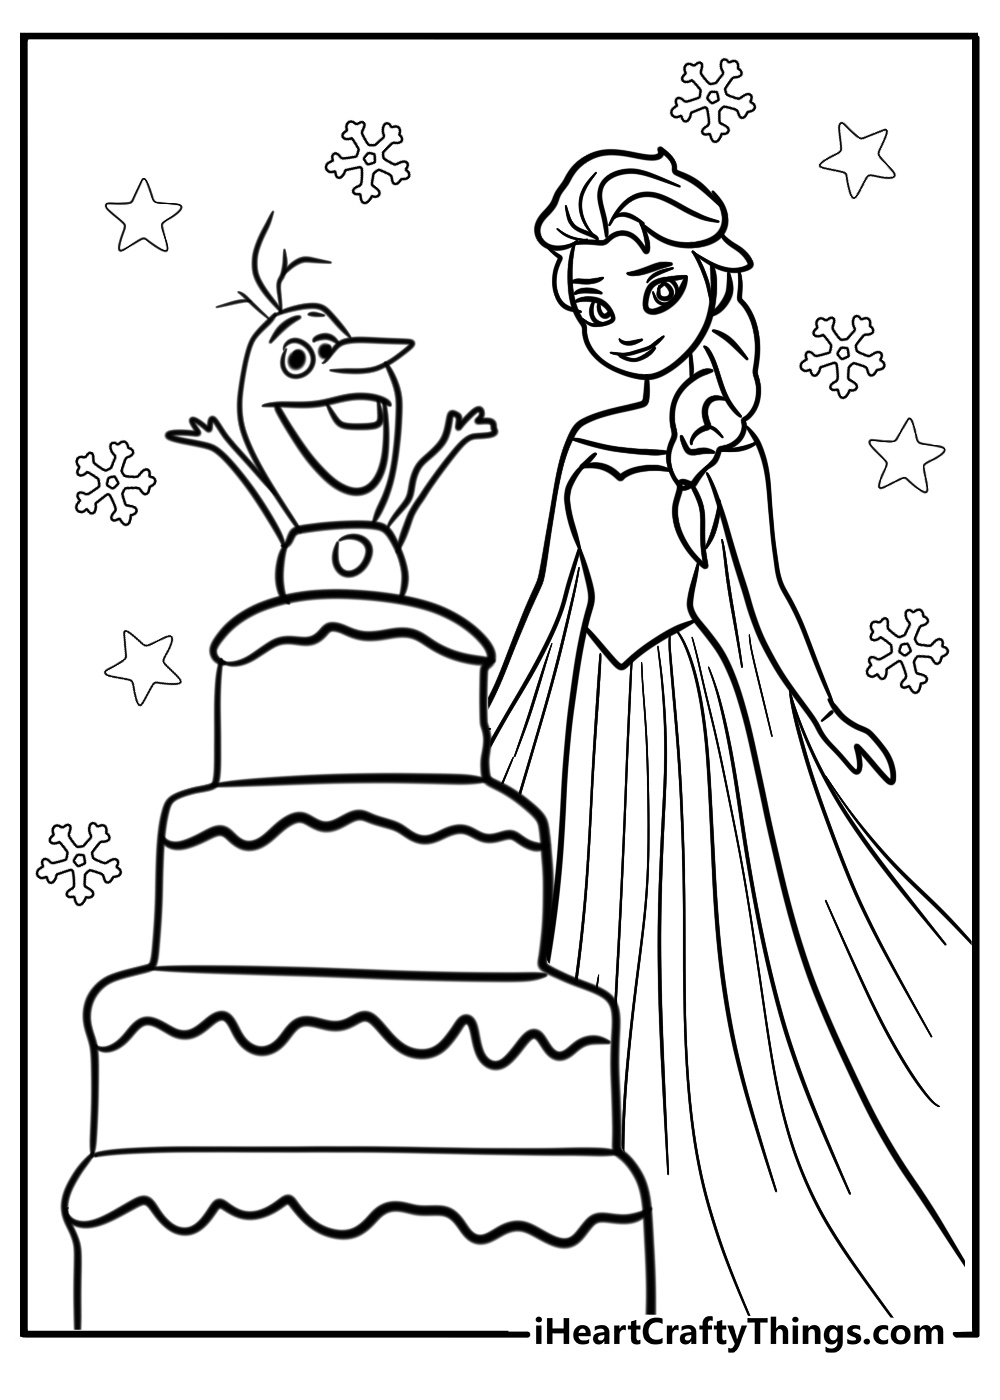 Frozen happy birthday coloring page